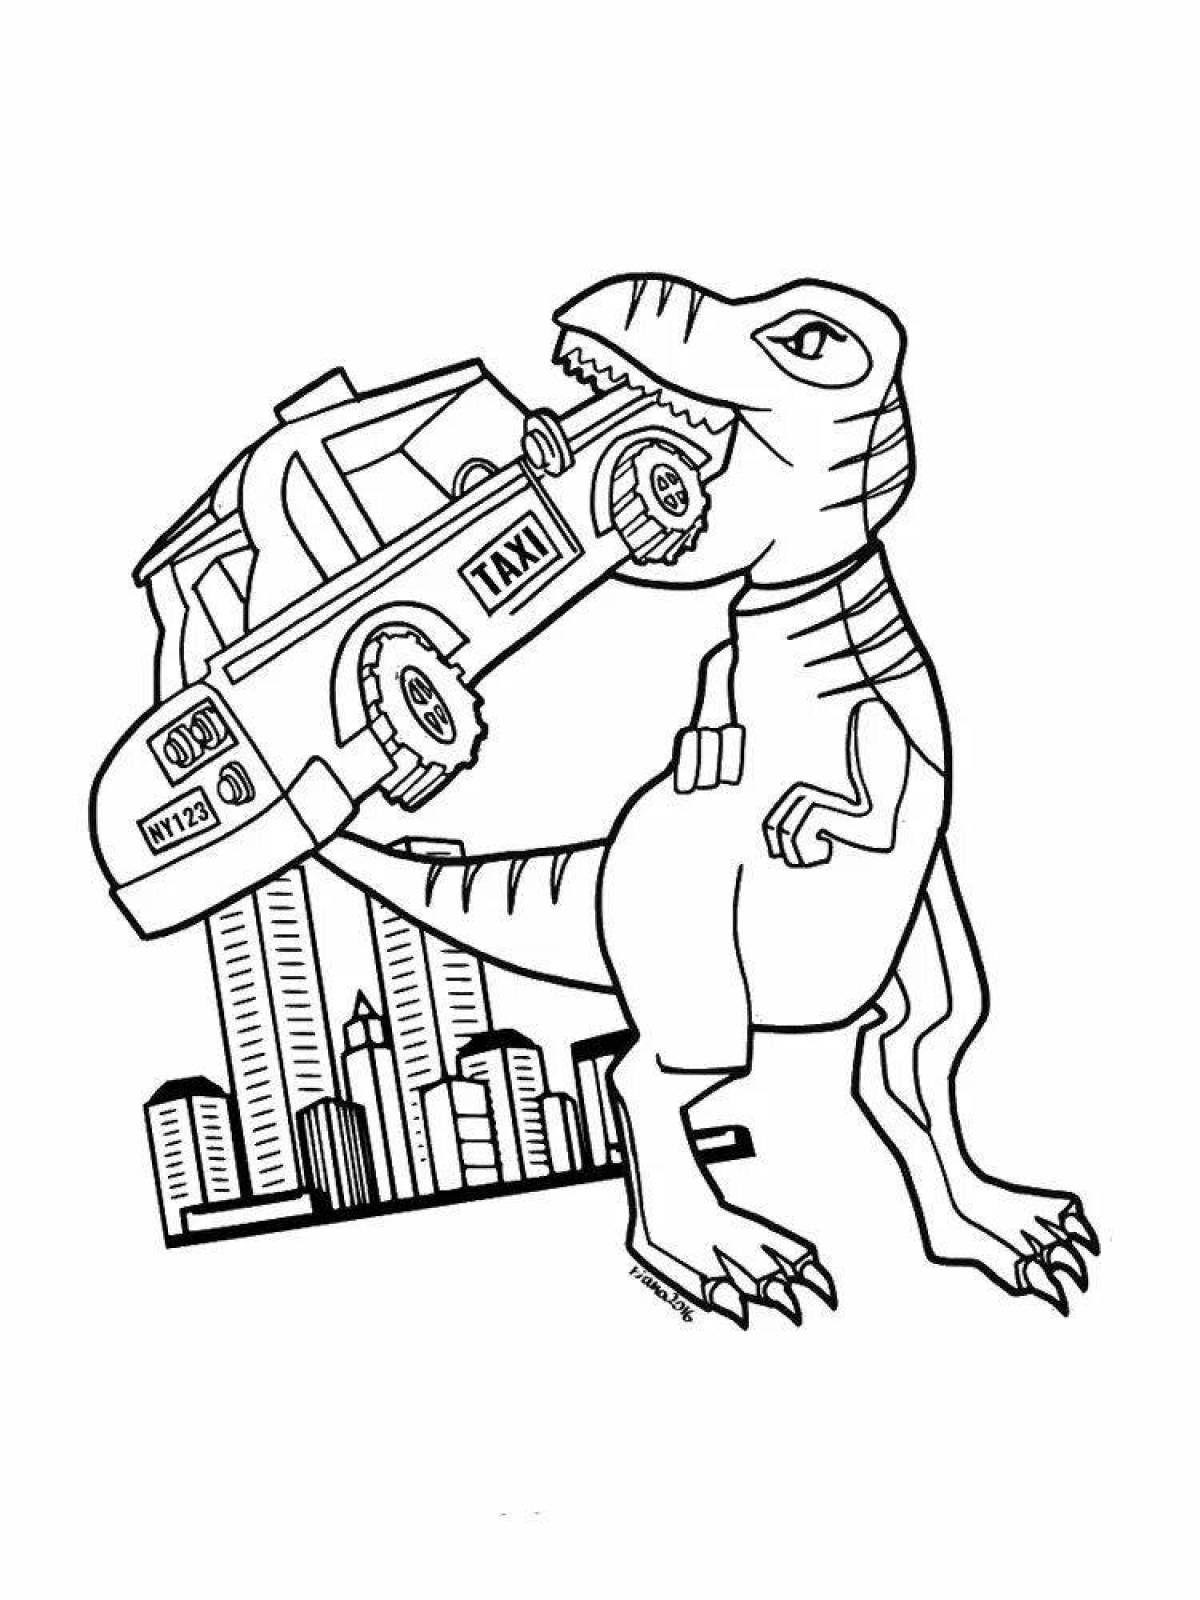 Exquisite lego dinosaur coloring page